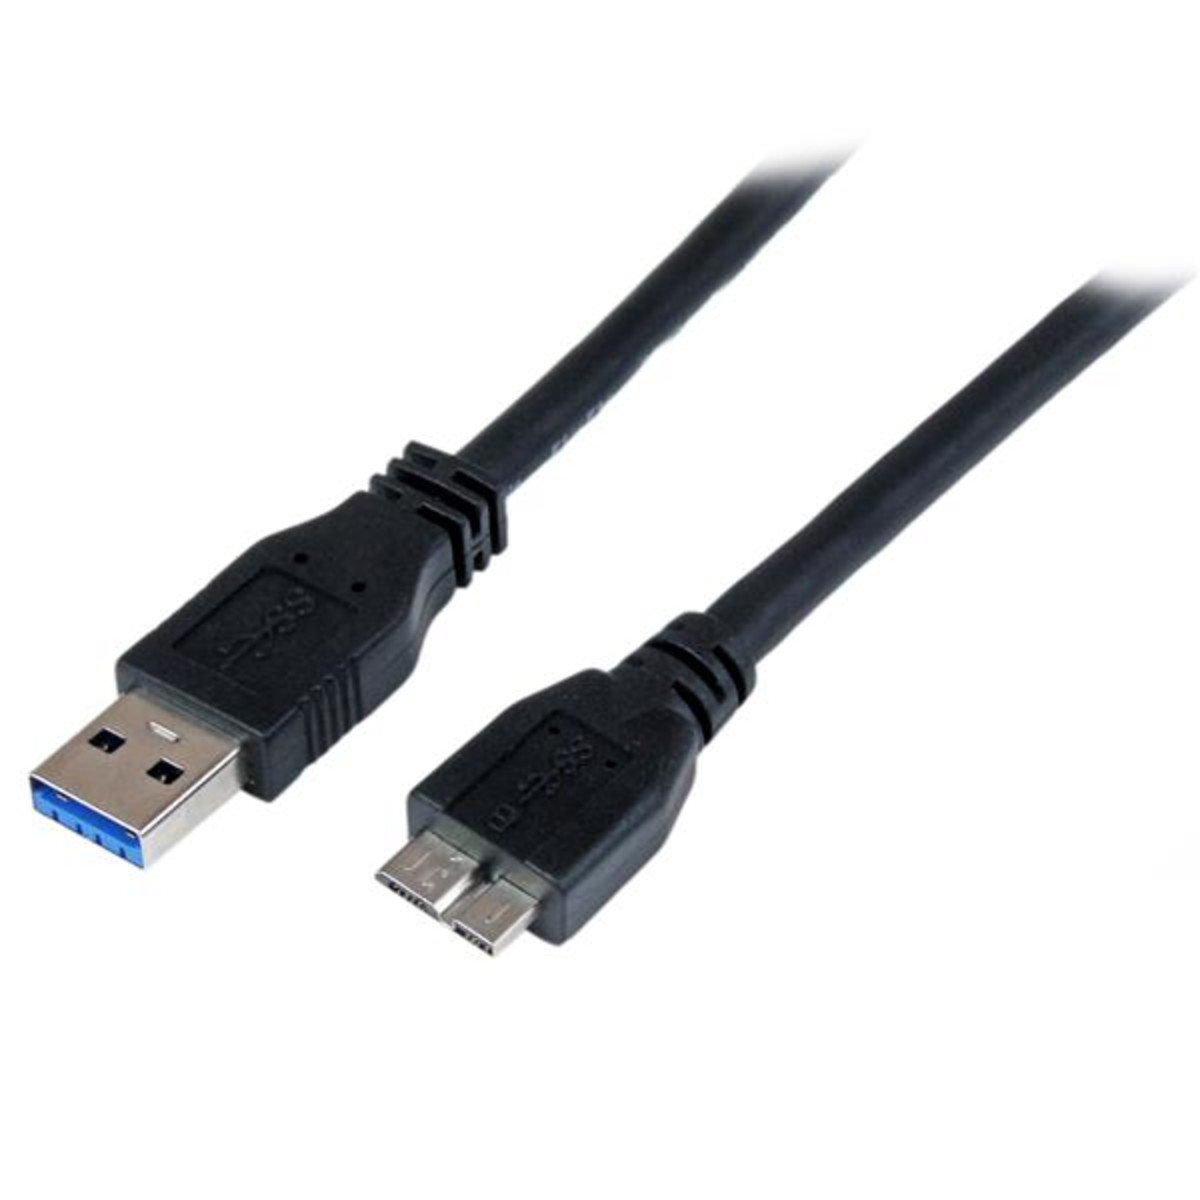 1m SS USB 3.0 A to Micro B Cable